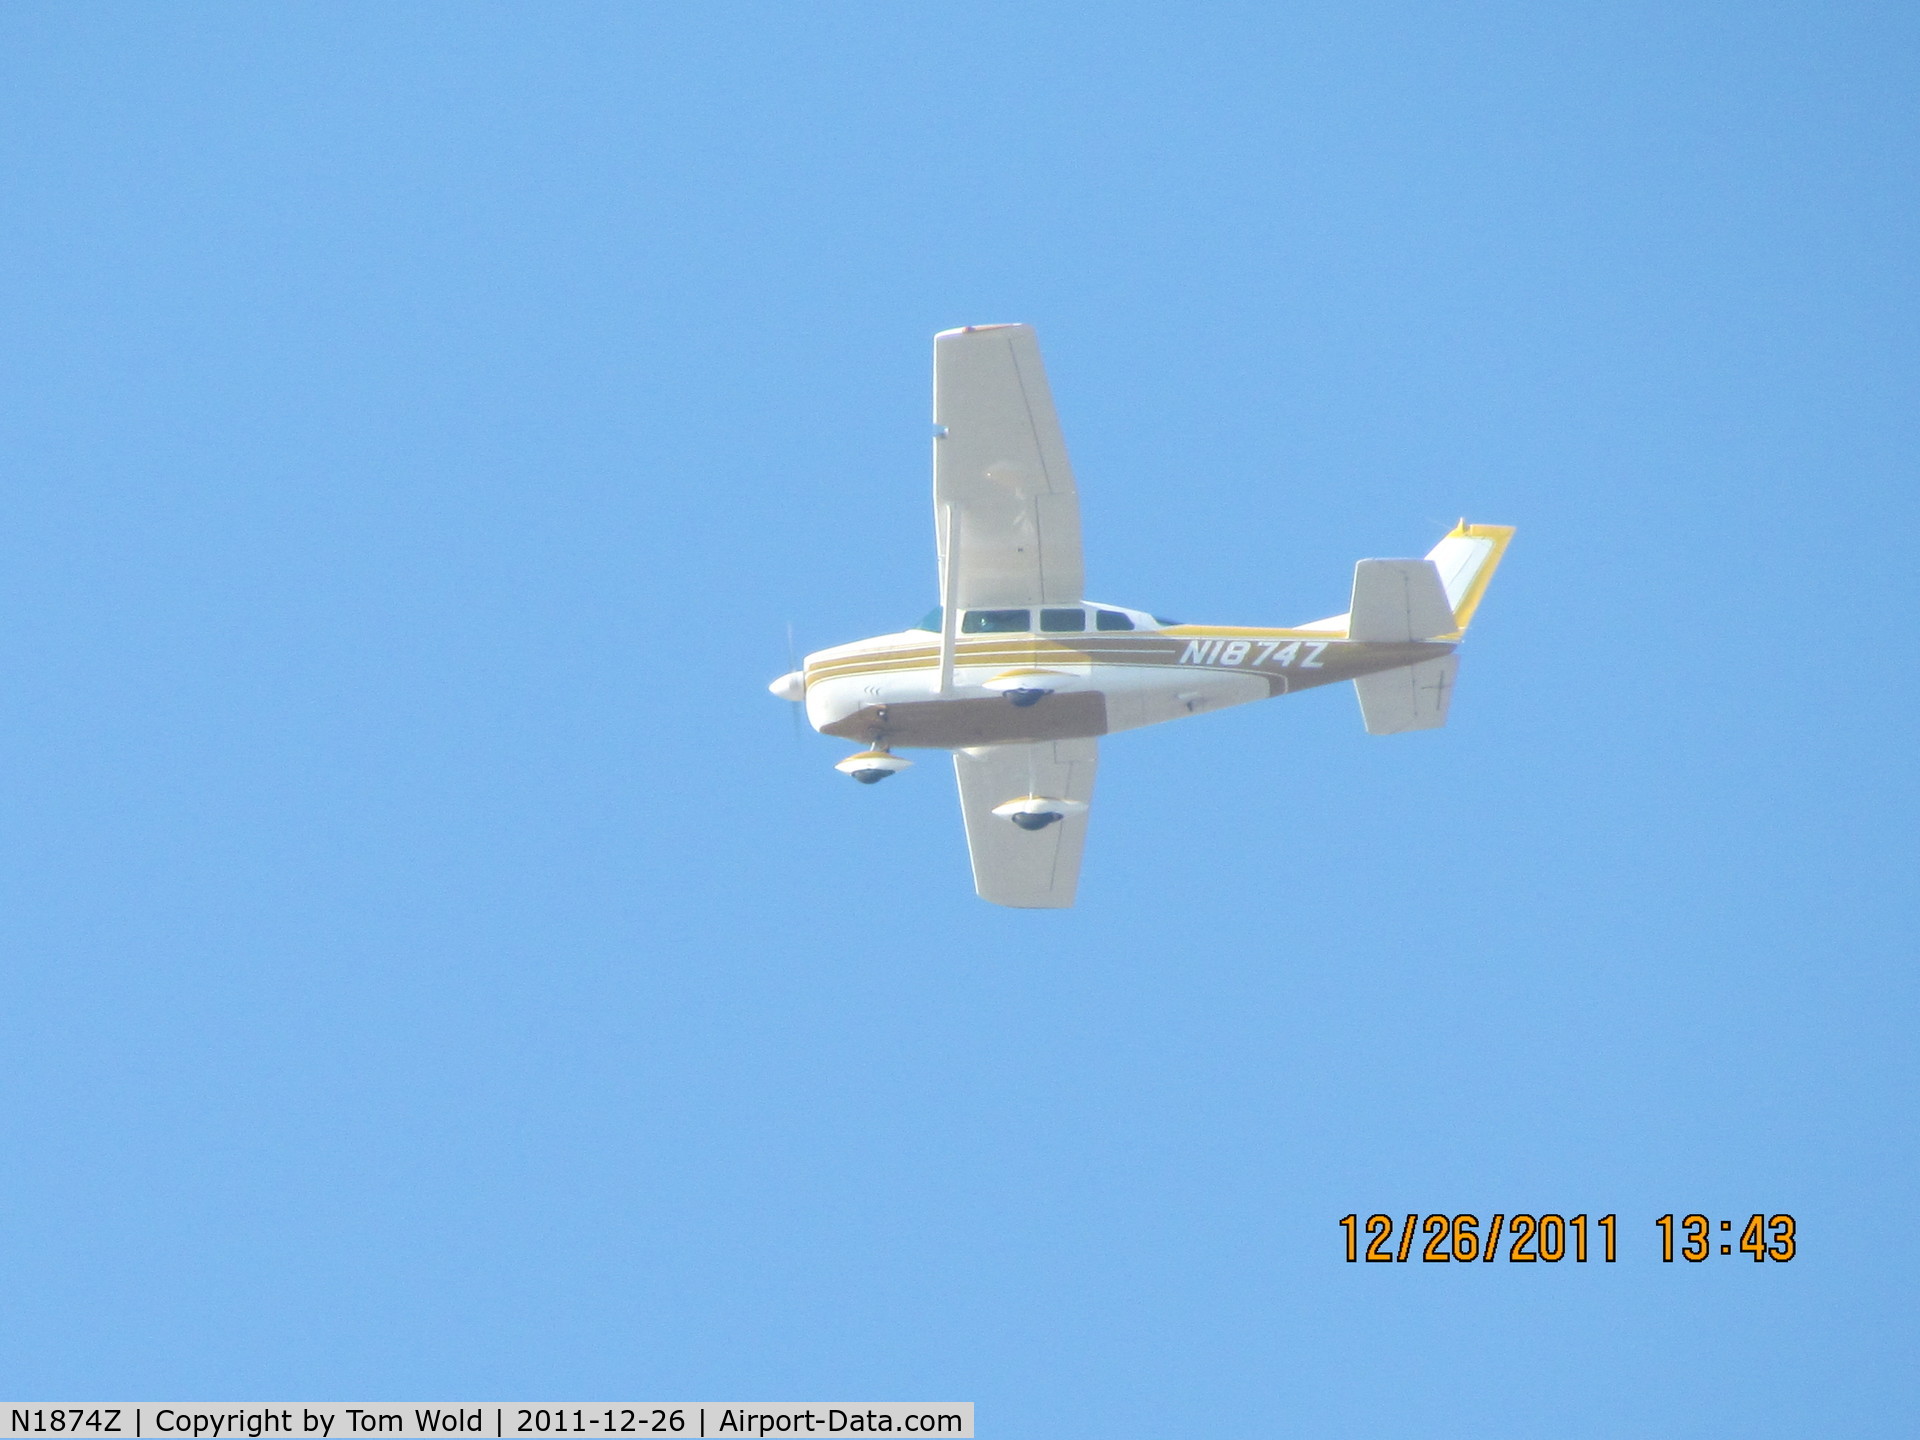 N1874Z, 1962 Cessna 210-5(205) C/N 2050074, Took this photo of N1874Z flying over the Arden Arcade area in Sacramento California.